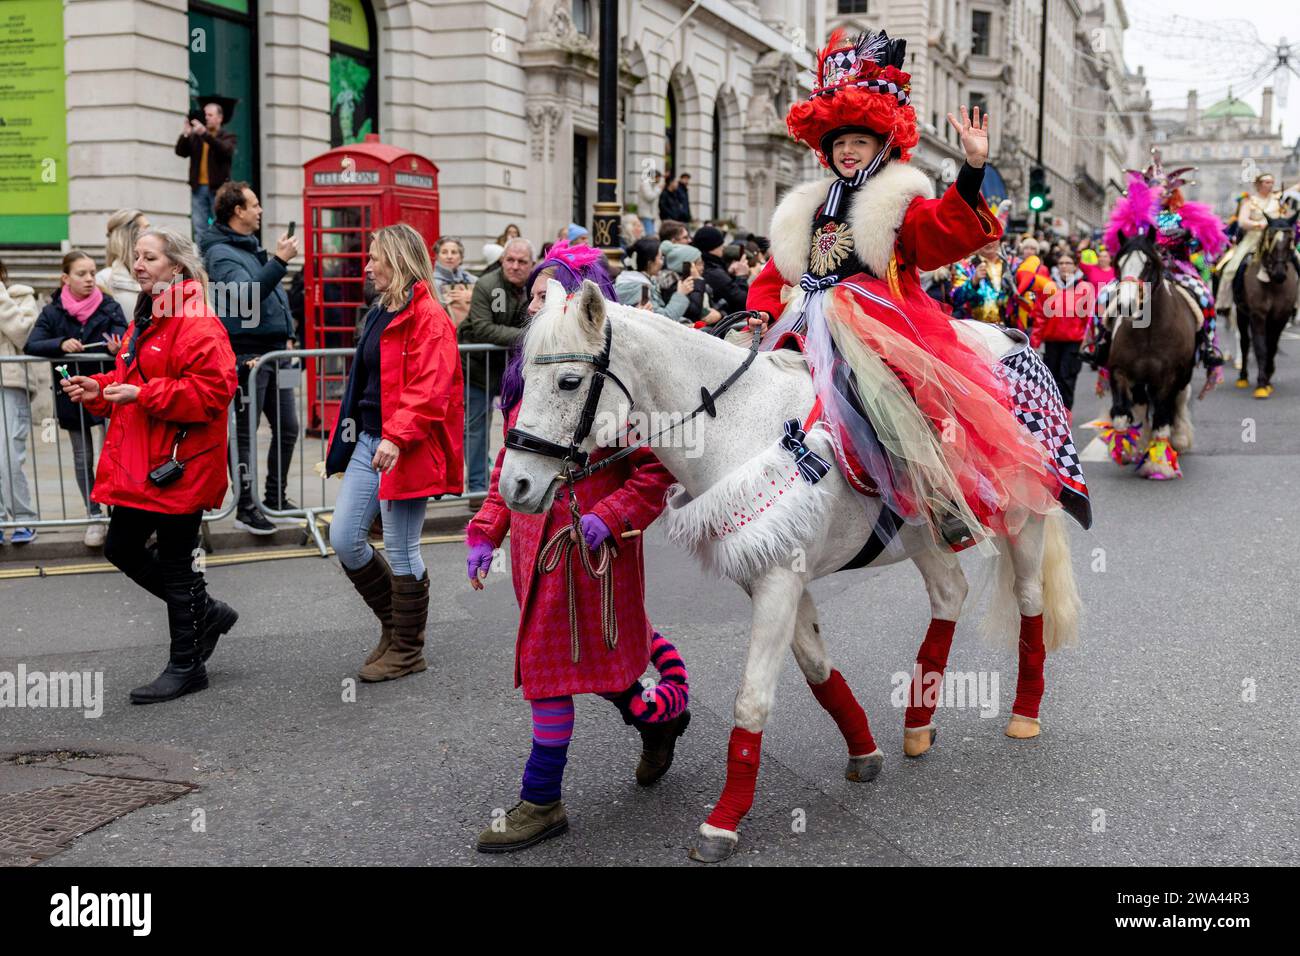 London Uk 01st Jan 2024 A Performer In Costumes Seen Riding Horses During The London New Years Day Parade The London New Years Day Parade Lnydp Is An Annual Parade Through The Streets Of The West End Of London On 1 January Since 1987 This Year More Than 8000 Performers Dance Their Way From Green Park To The Palace Of Westminster On The First Day Of 2024 And Attracted Viewings From Hundreds Of Thousands Of Tourists Credit Sopa Images Limitedalamy Live News 2WA44R3 